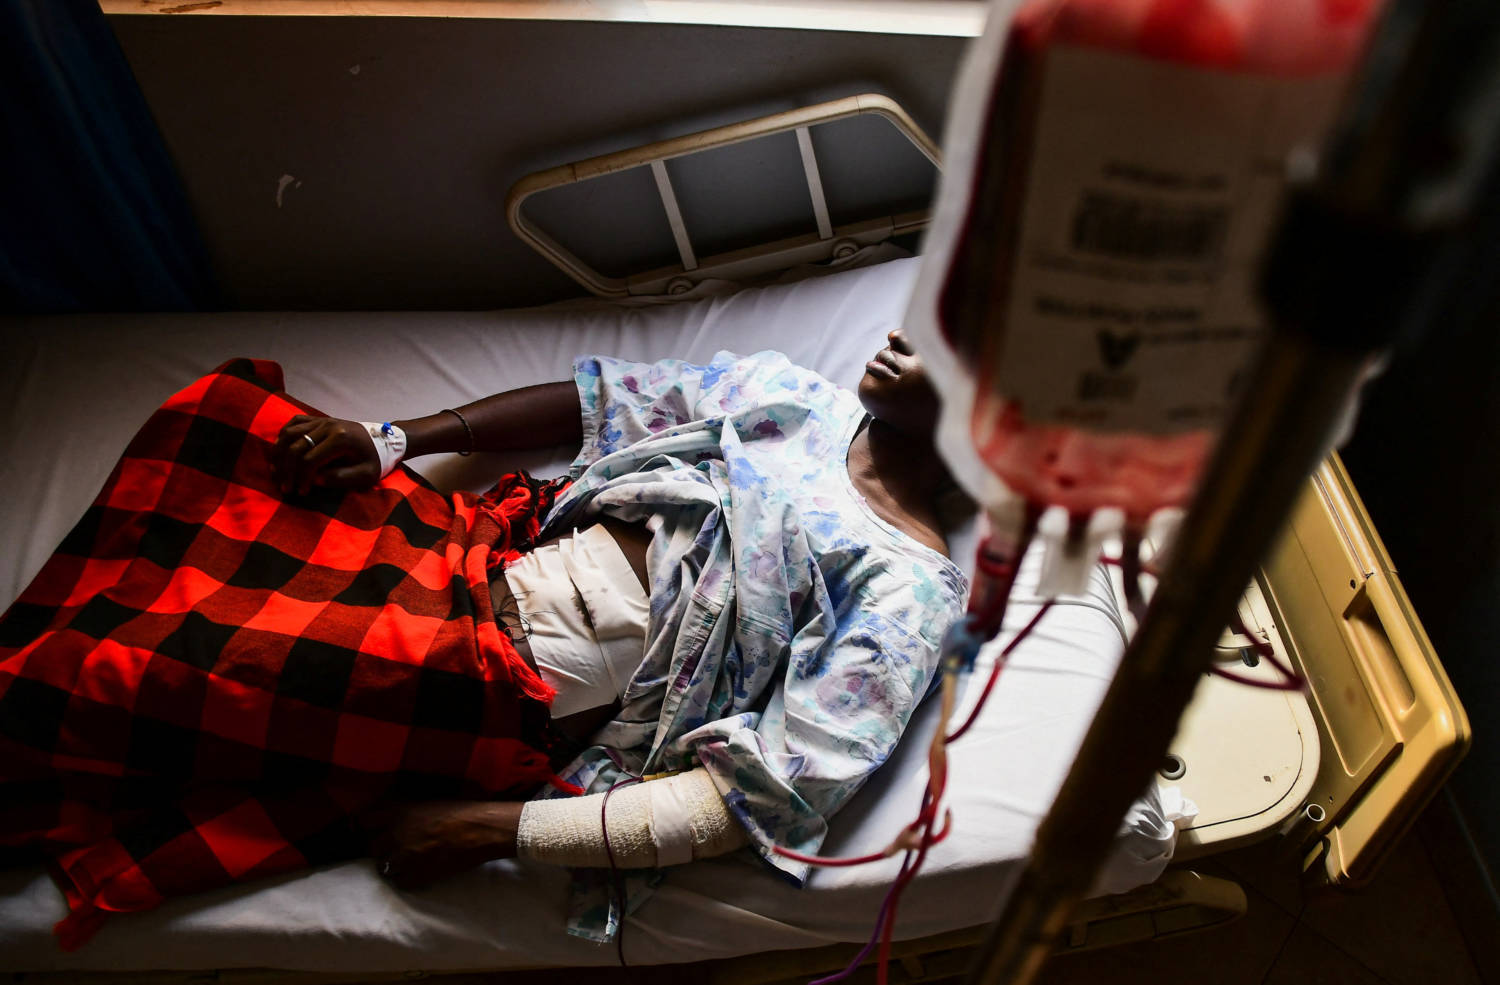 Ugandan Lgbtq Activist Steven Kabuye Receives Treatment After He Was Stabbed By Unknown People, At A Hospital In Kitende Along Entebbe Road On The Outskirts Of Kampala